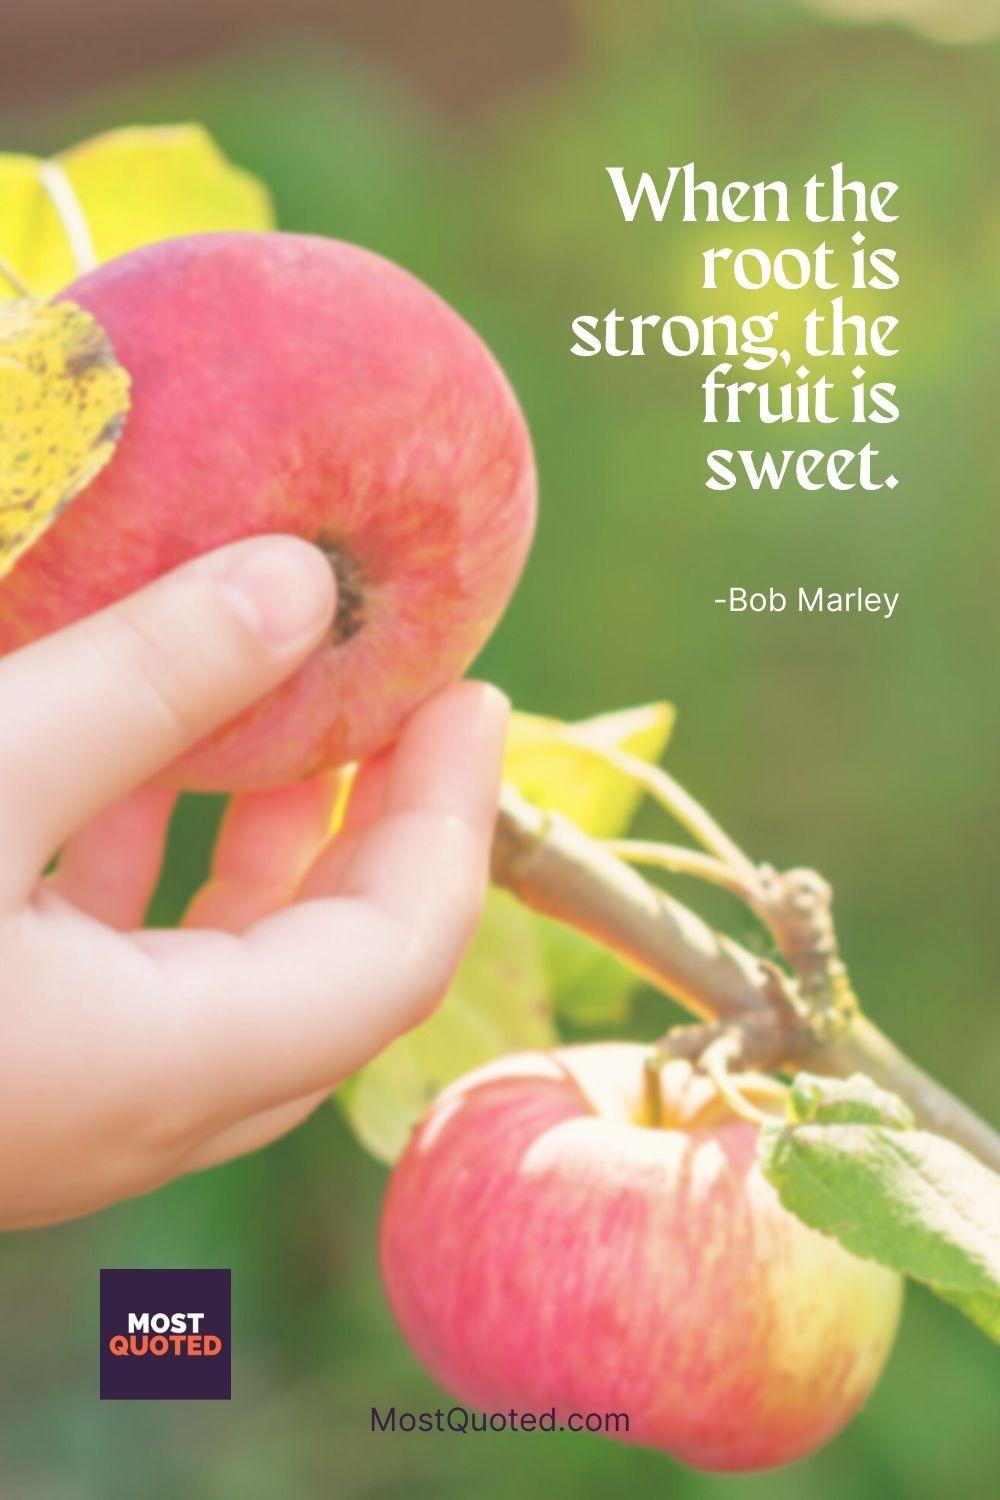 When the root is strong, the fruit is sweet. - Bob Marley